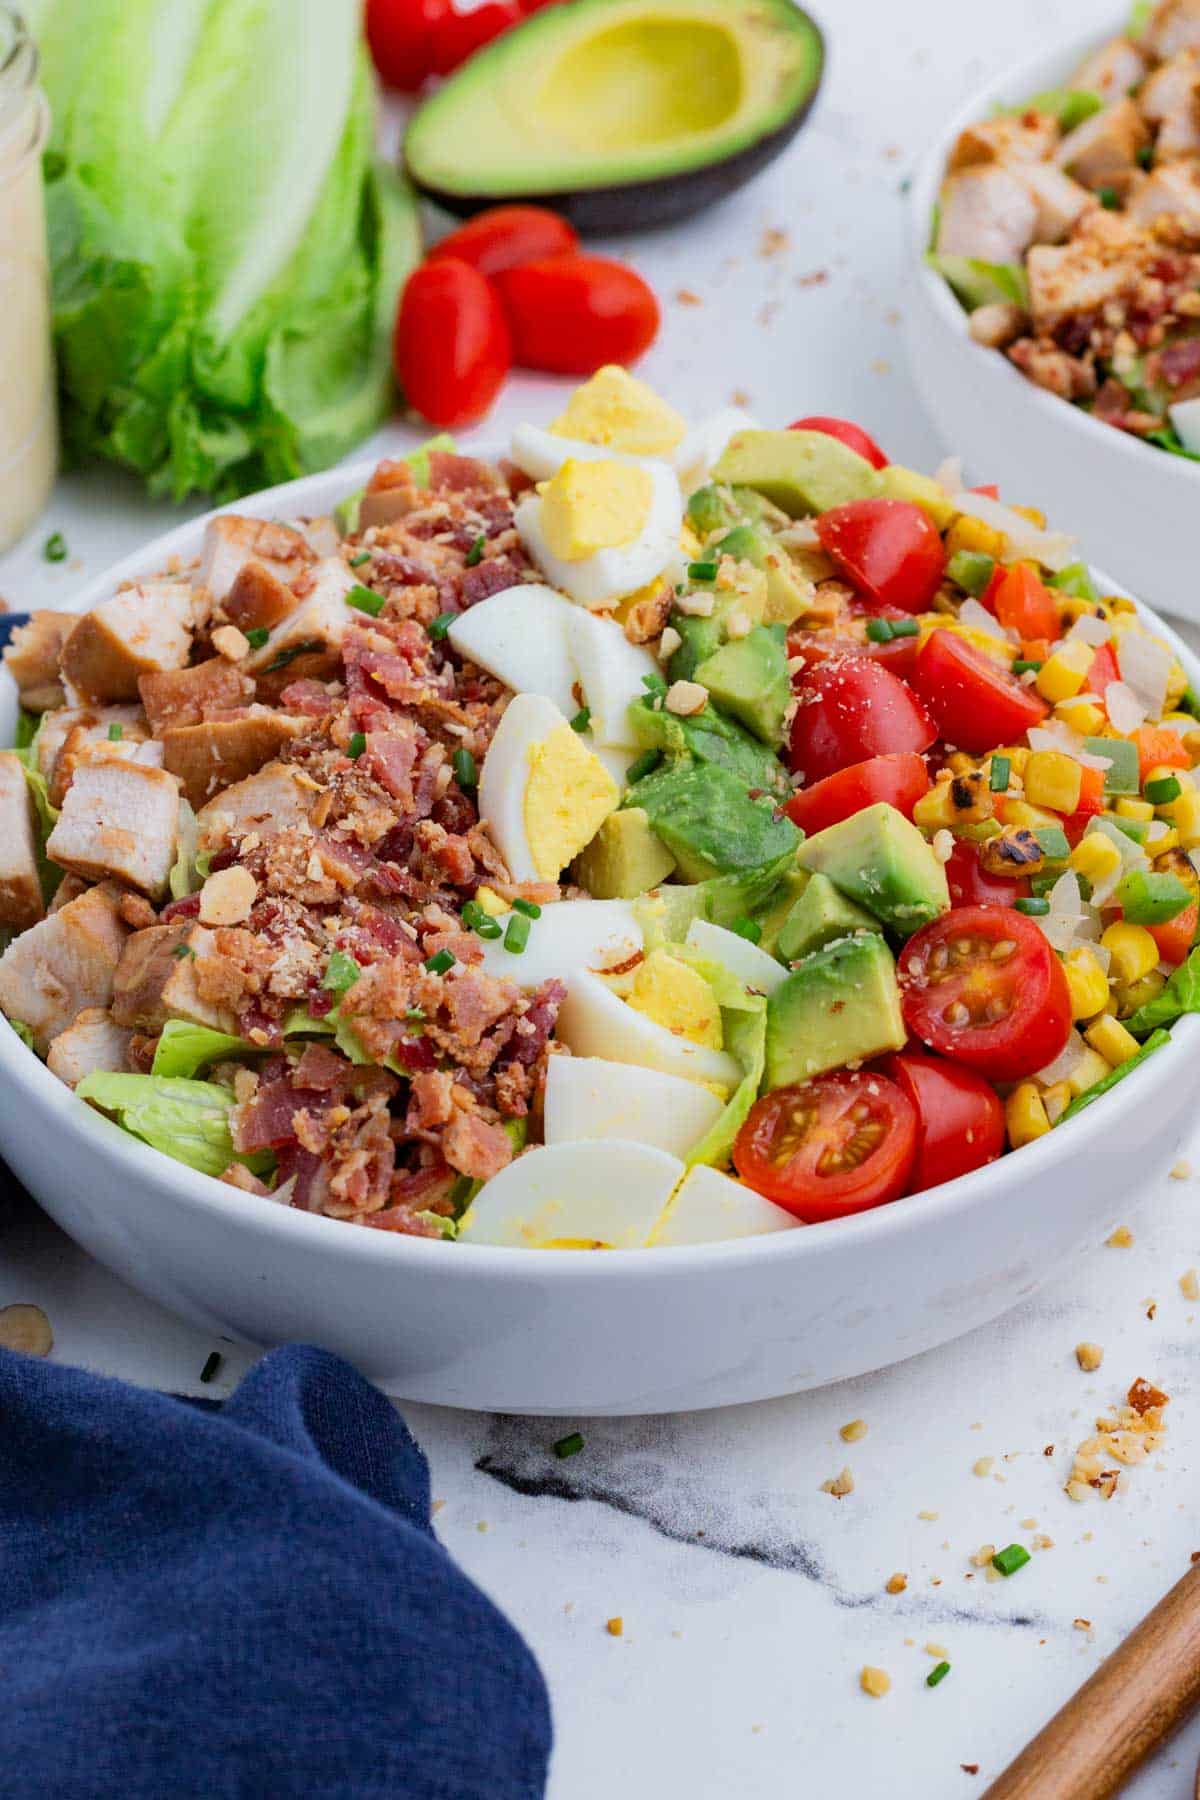 This Cobb salad includes smoky BBQ chicken along with all of the traditional toppings.